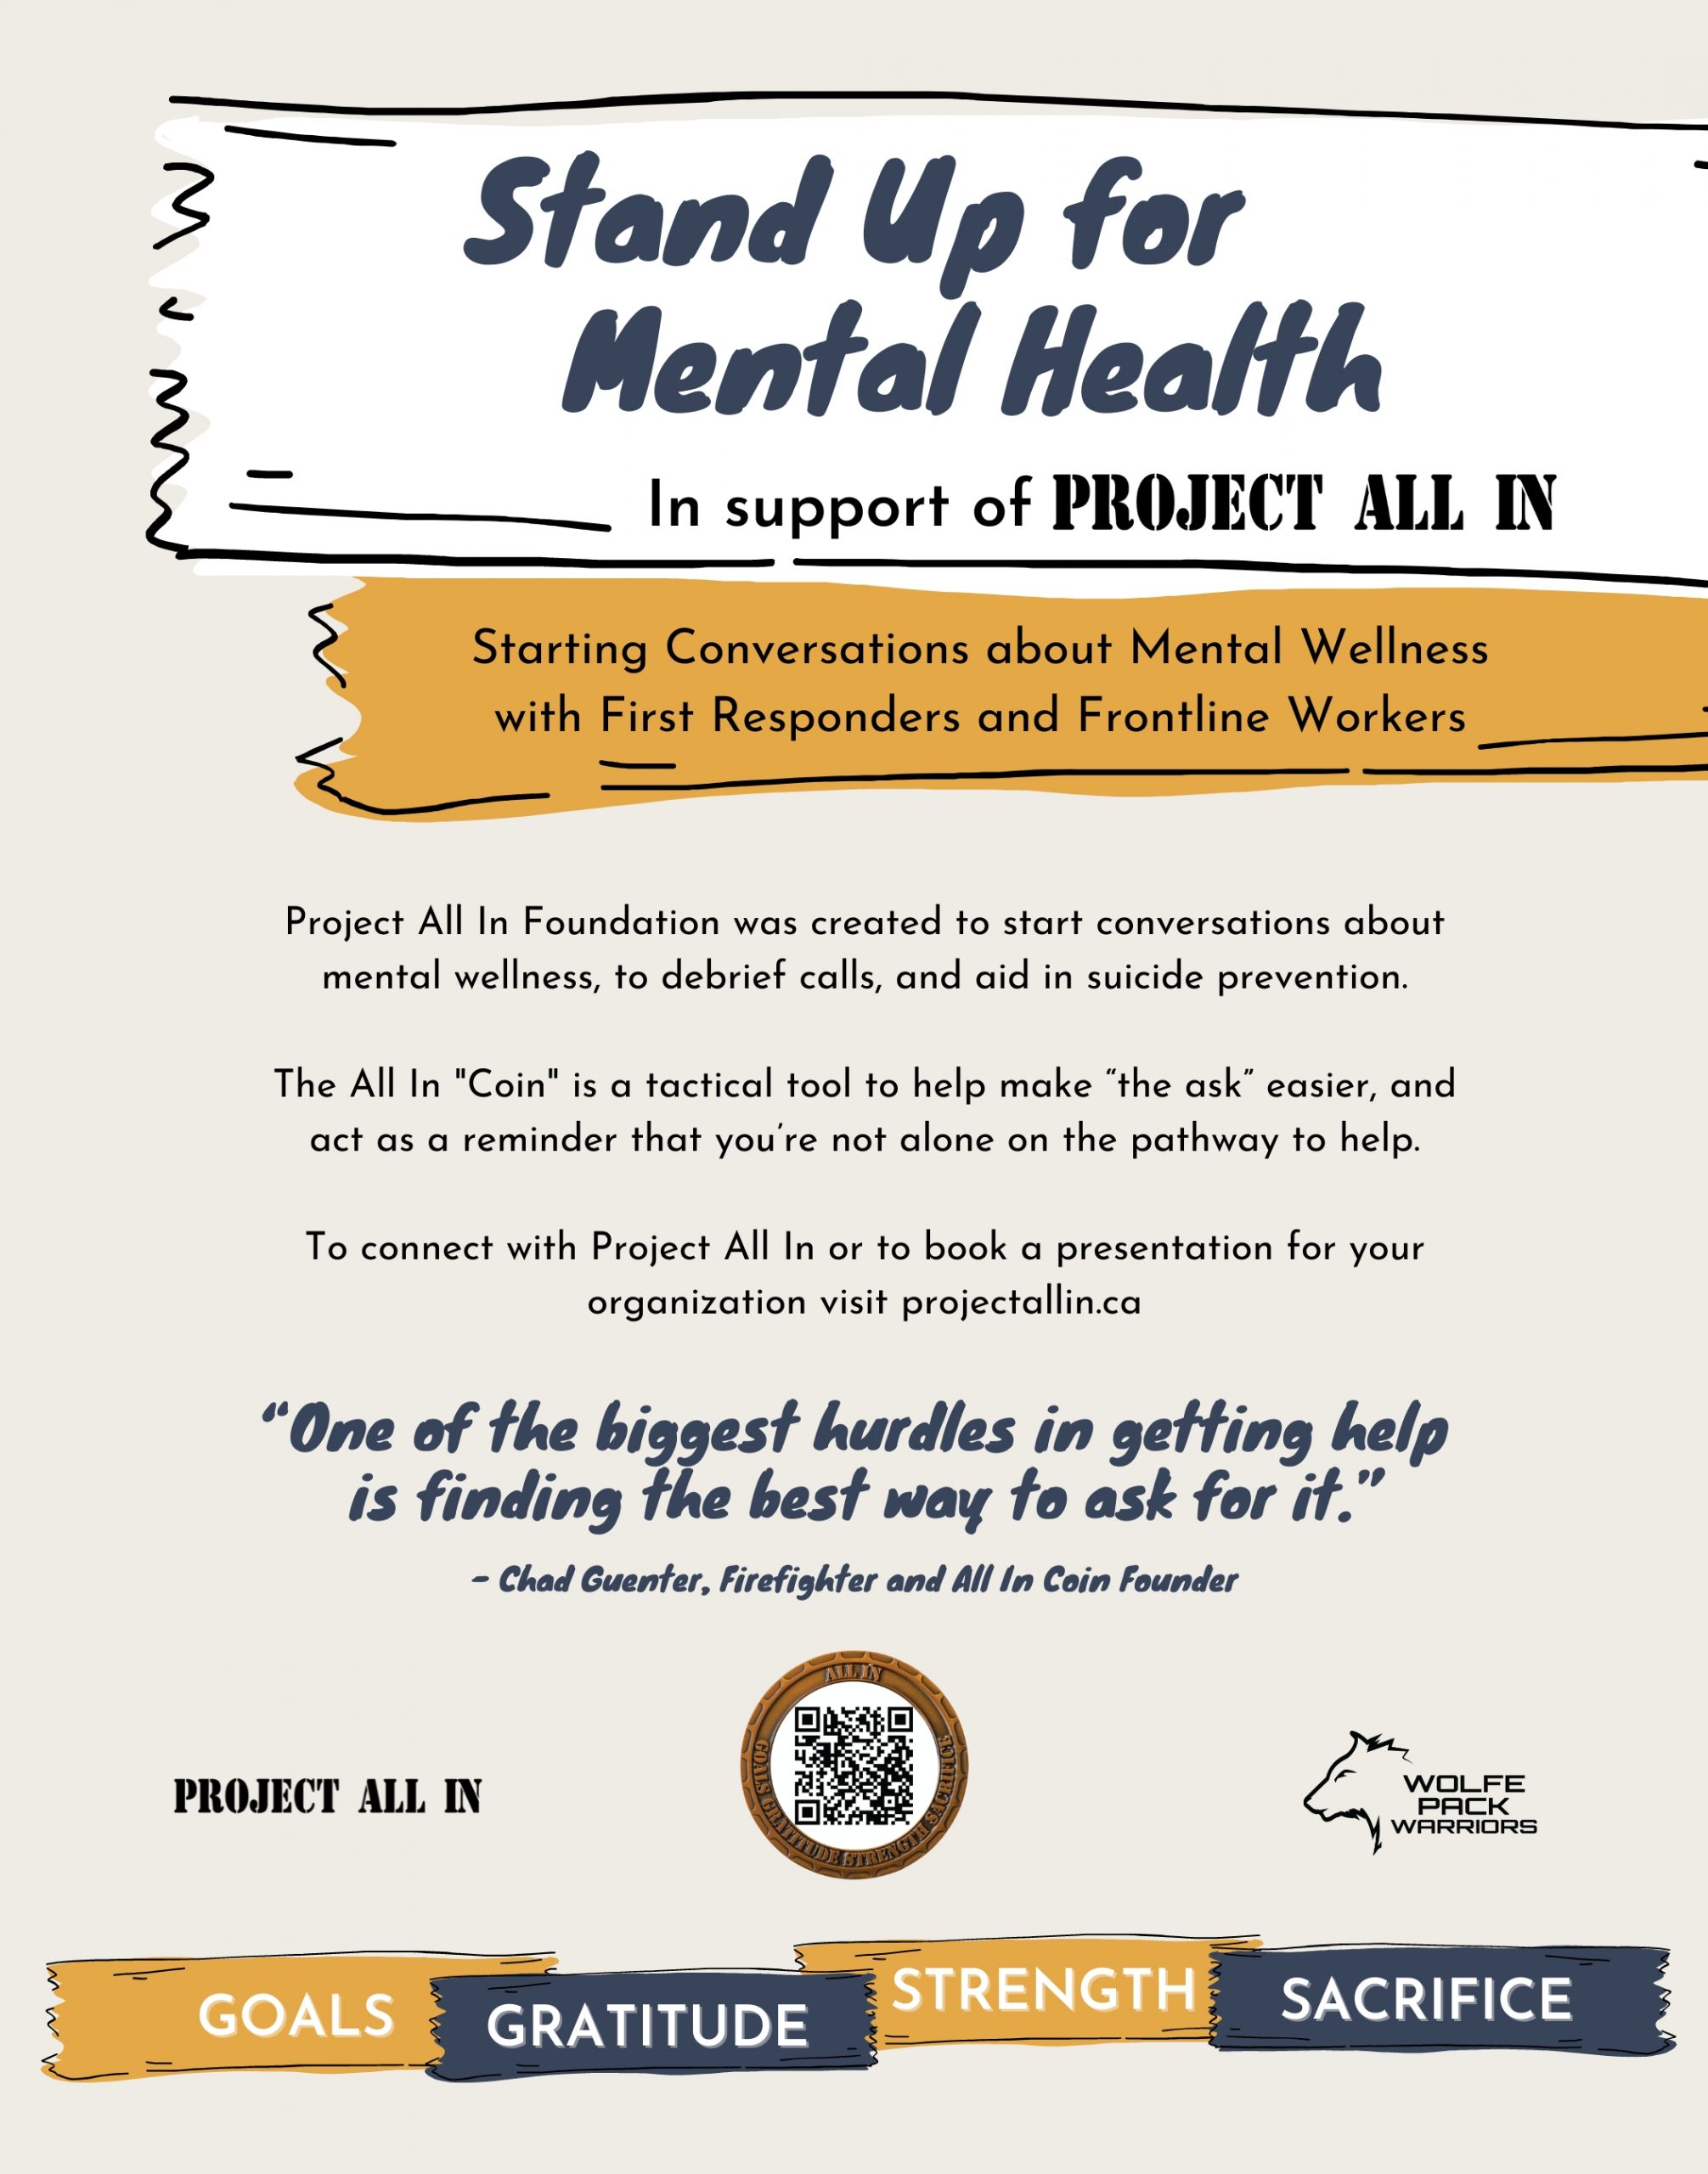 Stand up for Mental Health - 2022 Q1 Initiative - Wolfe Pack Warriors